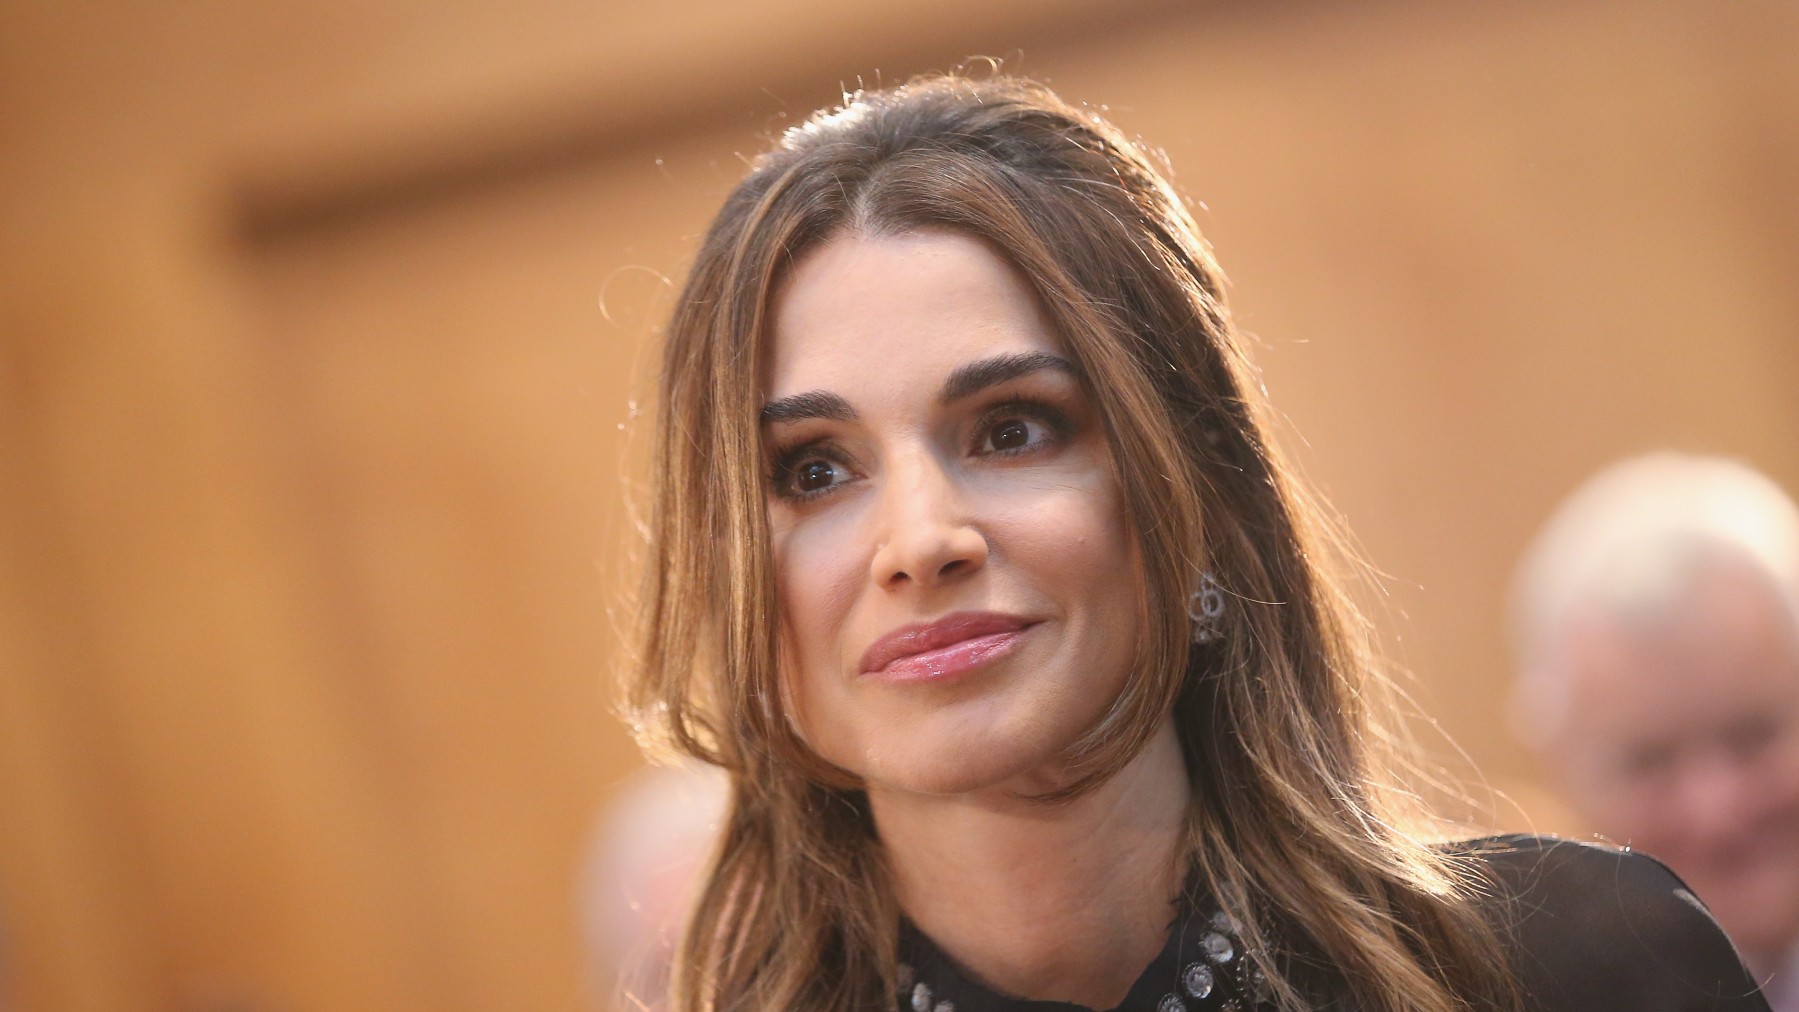 advice Queen Rania gave to her daughter-in-law